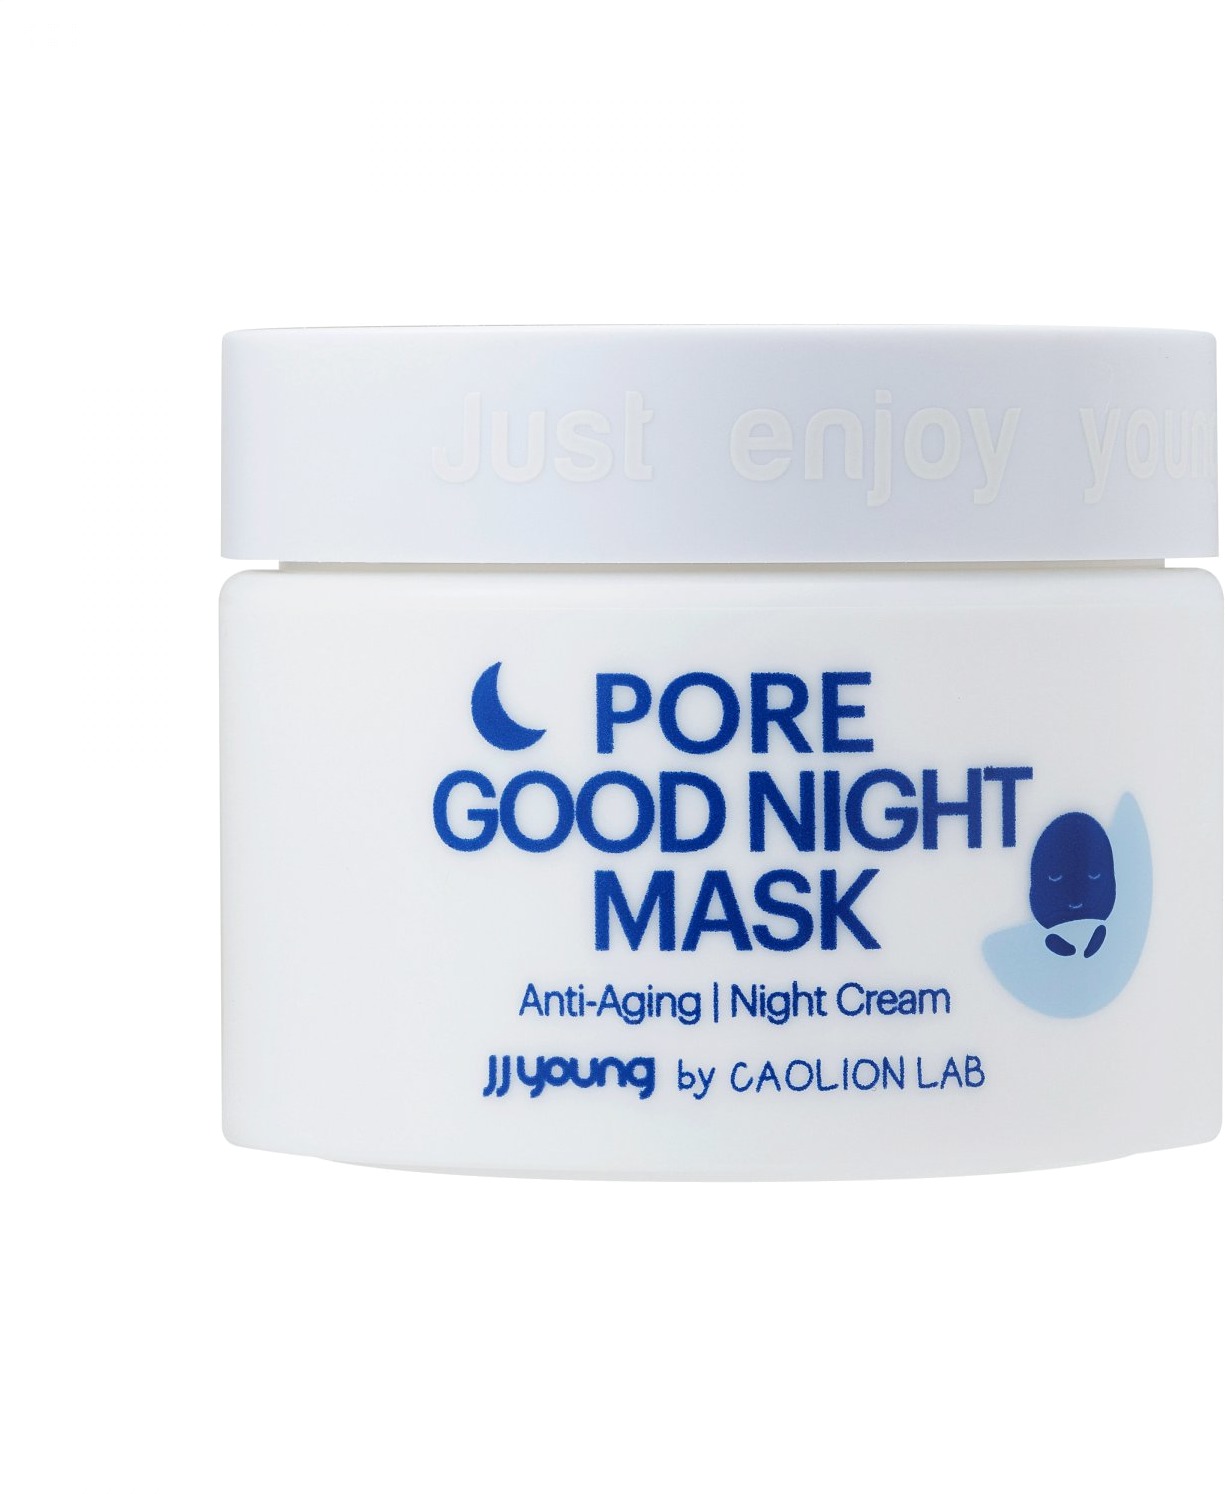 JJ Young Pore Good Night Mask